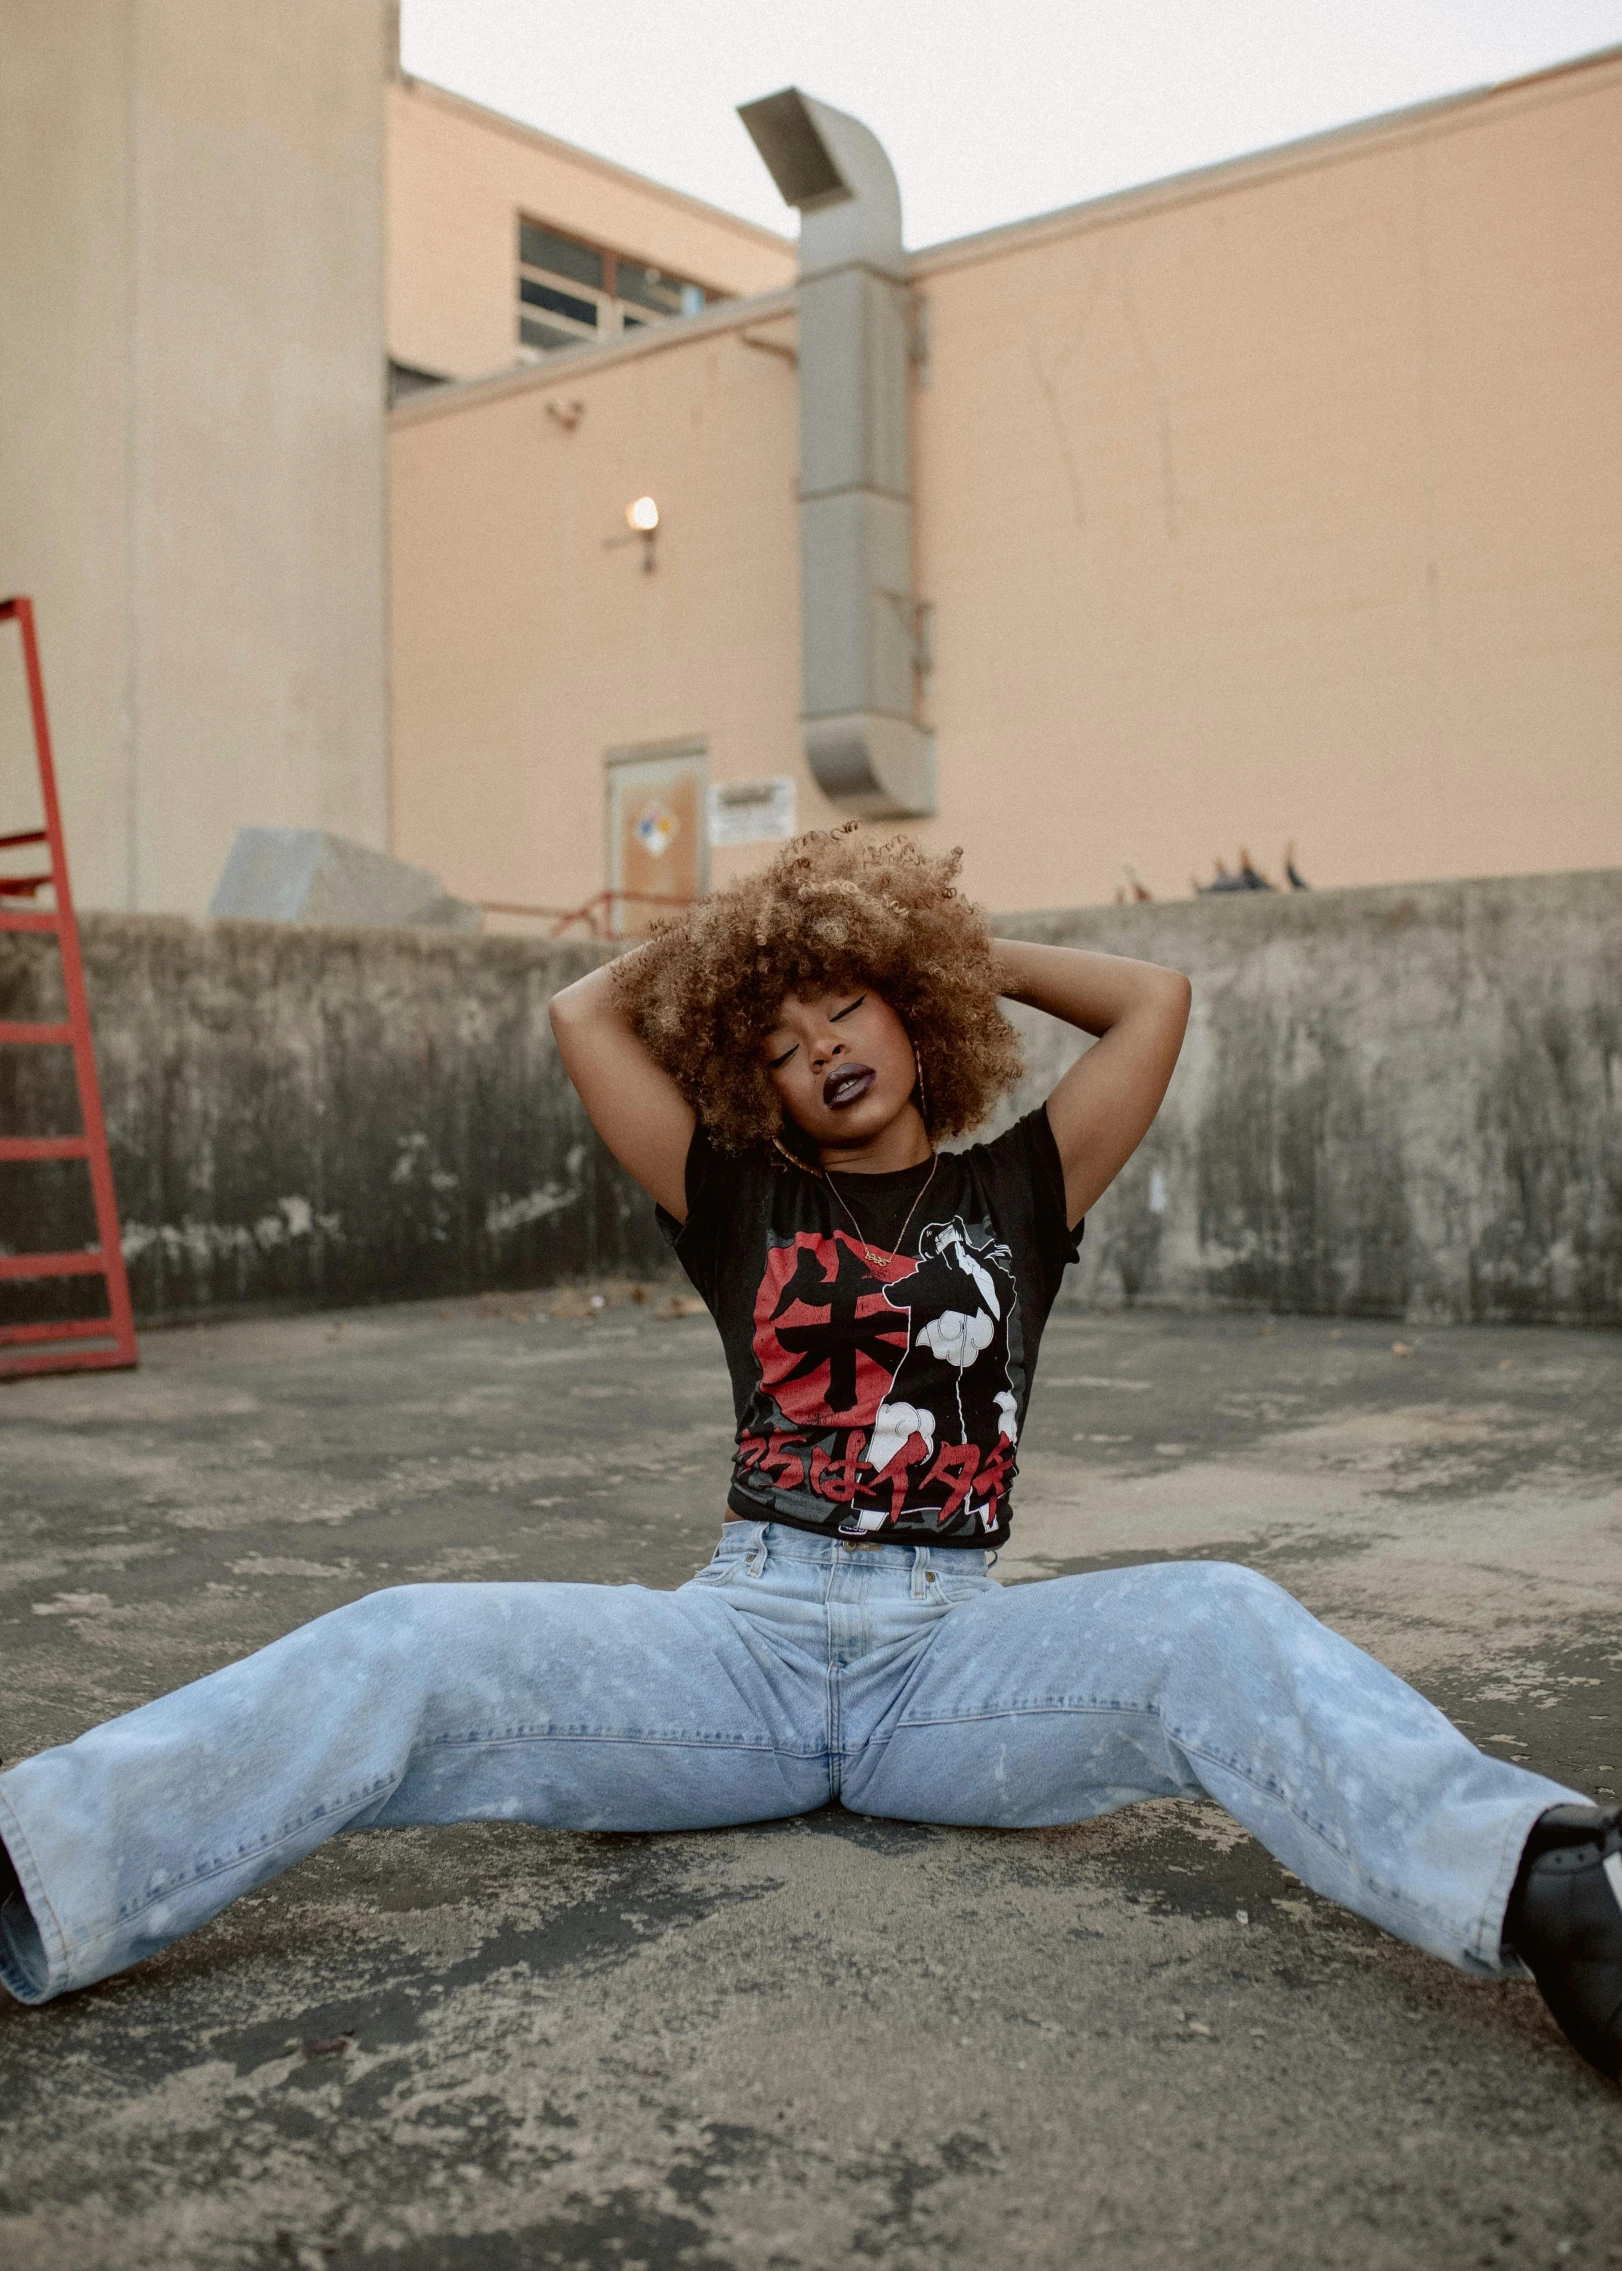 a woman sitting on the ground with her hands behind her head, an album cover, trending on pexels, black arts movement, kawaii shirt and jeans, eighties-pinup style, aggressive pose, wild ginger hair